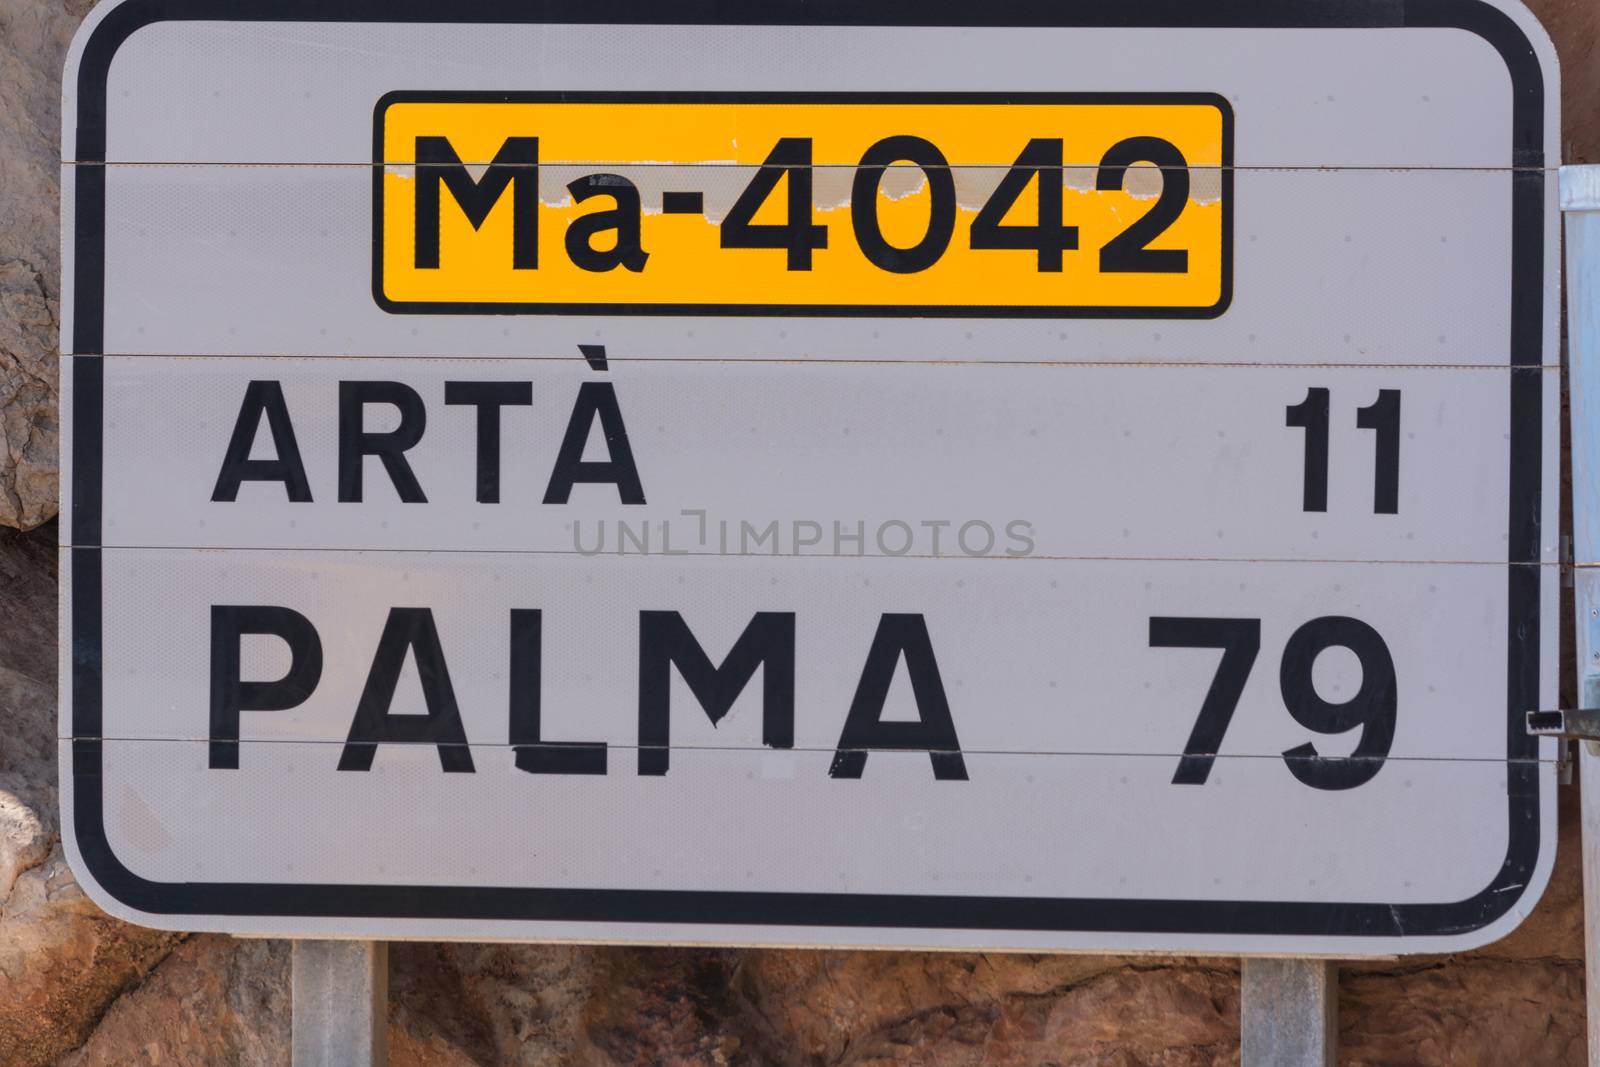 Road sign in Spain. Give the distance to the places Arta and Palma. Recording in Mallorca, Spain. Caption in Spanish.